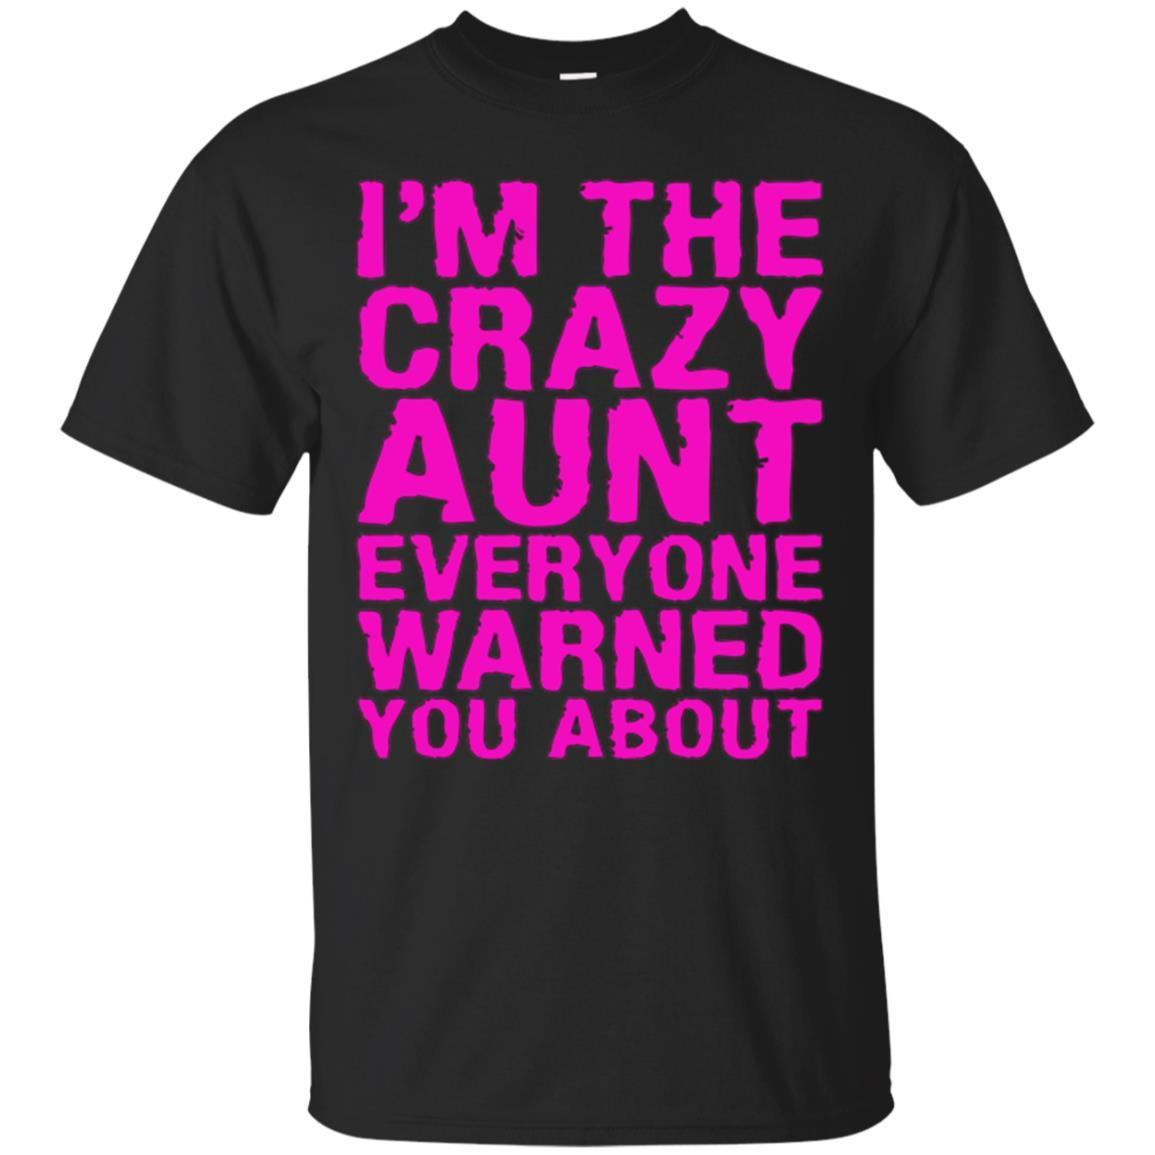 Check Out This Awesome Crazy Aunt Everyone Warned You About T-shirt Gift Idea